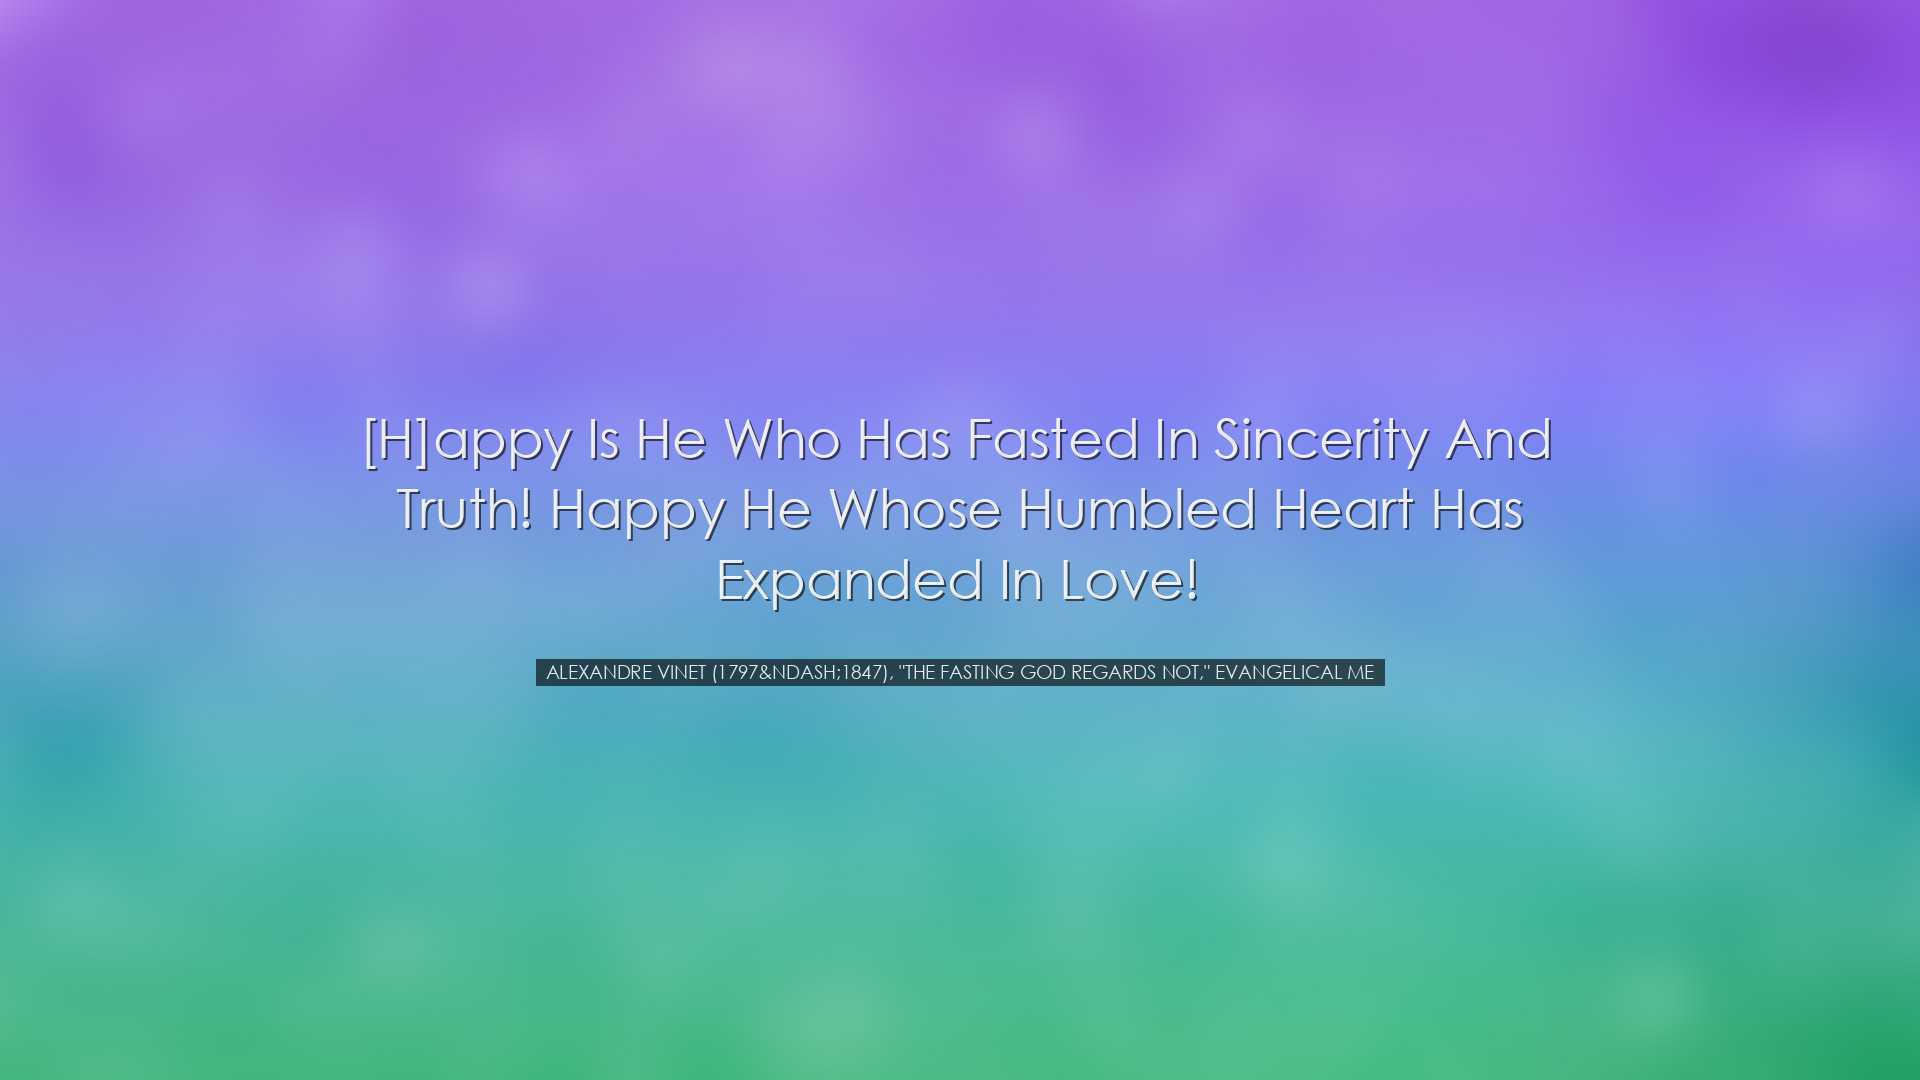 [H]appy is he who has fasted in sincerity and truth! Happy he whos